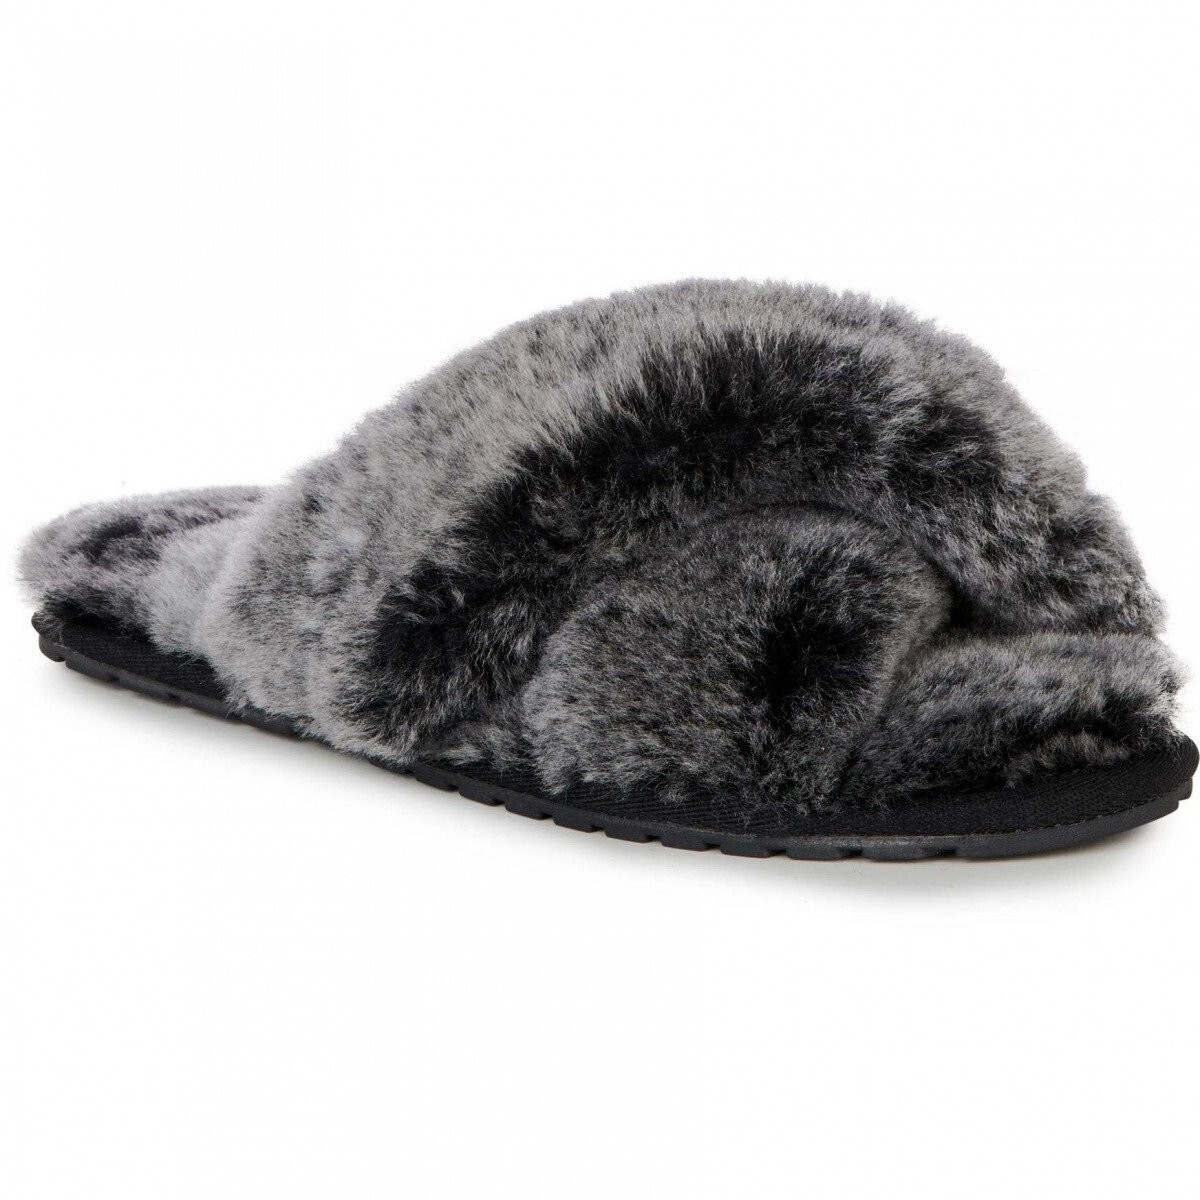 Buy Emu Mayberry Slippers Sheepskin from £48.00 (Today) – Best Deals on ...